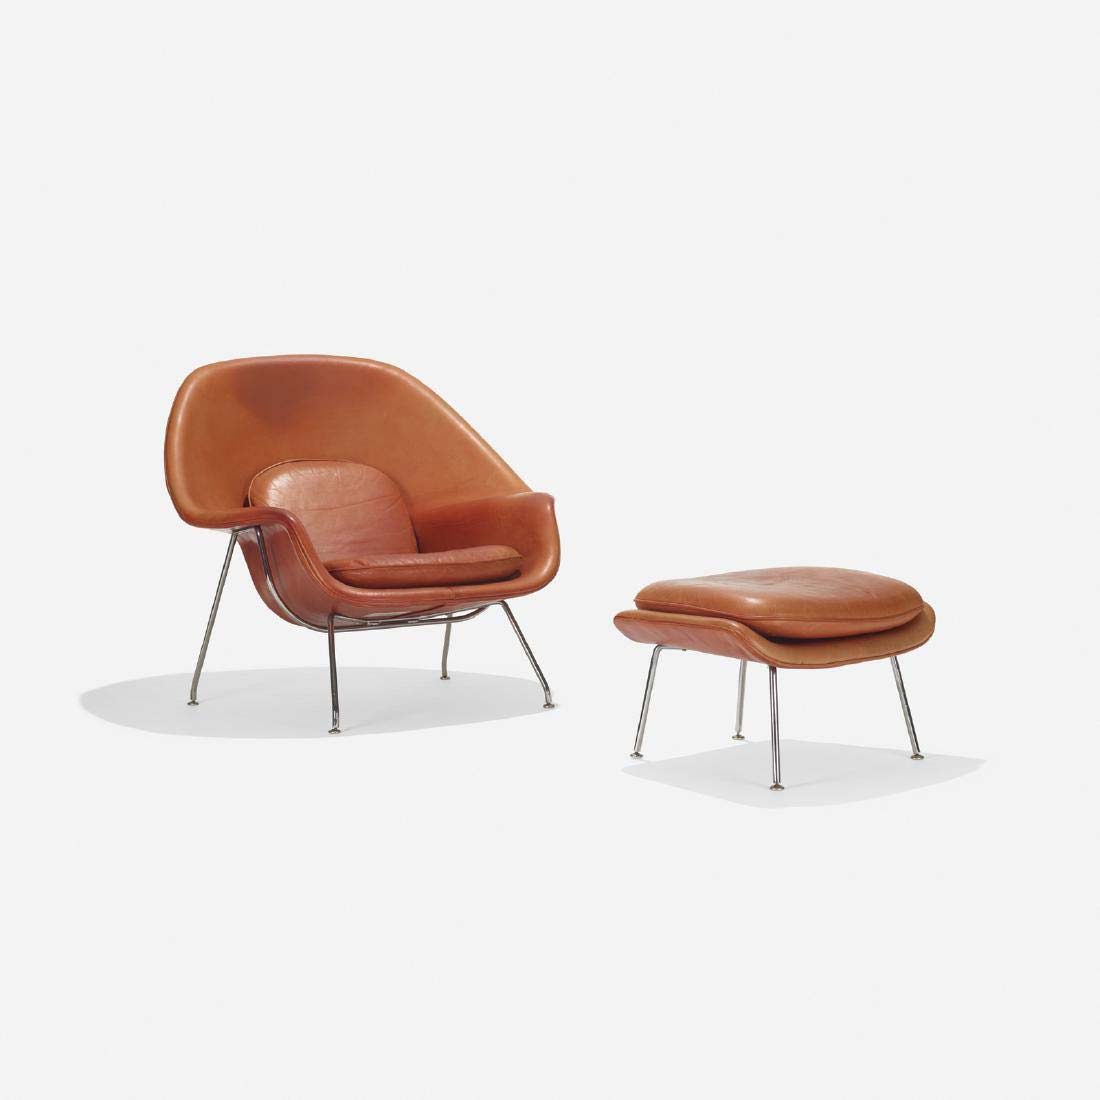 An iconic form in modern furniture was Eero Saarinen’s Womb chair for Knoll that was designed to be an oasis of calm and comfort. This circa 1970 example sold for $4,750 + the buyer’s premium in September 2017 at Wright. Photo courtesy of Wright and LiveAuctioneers